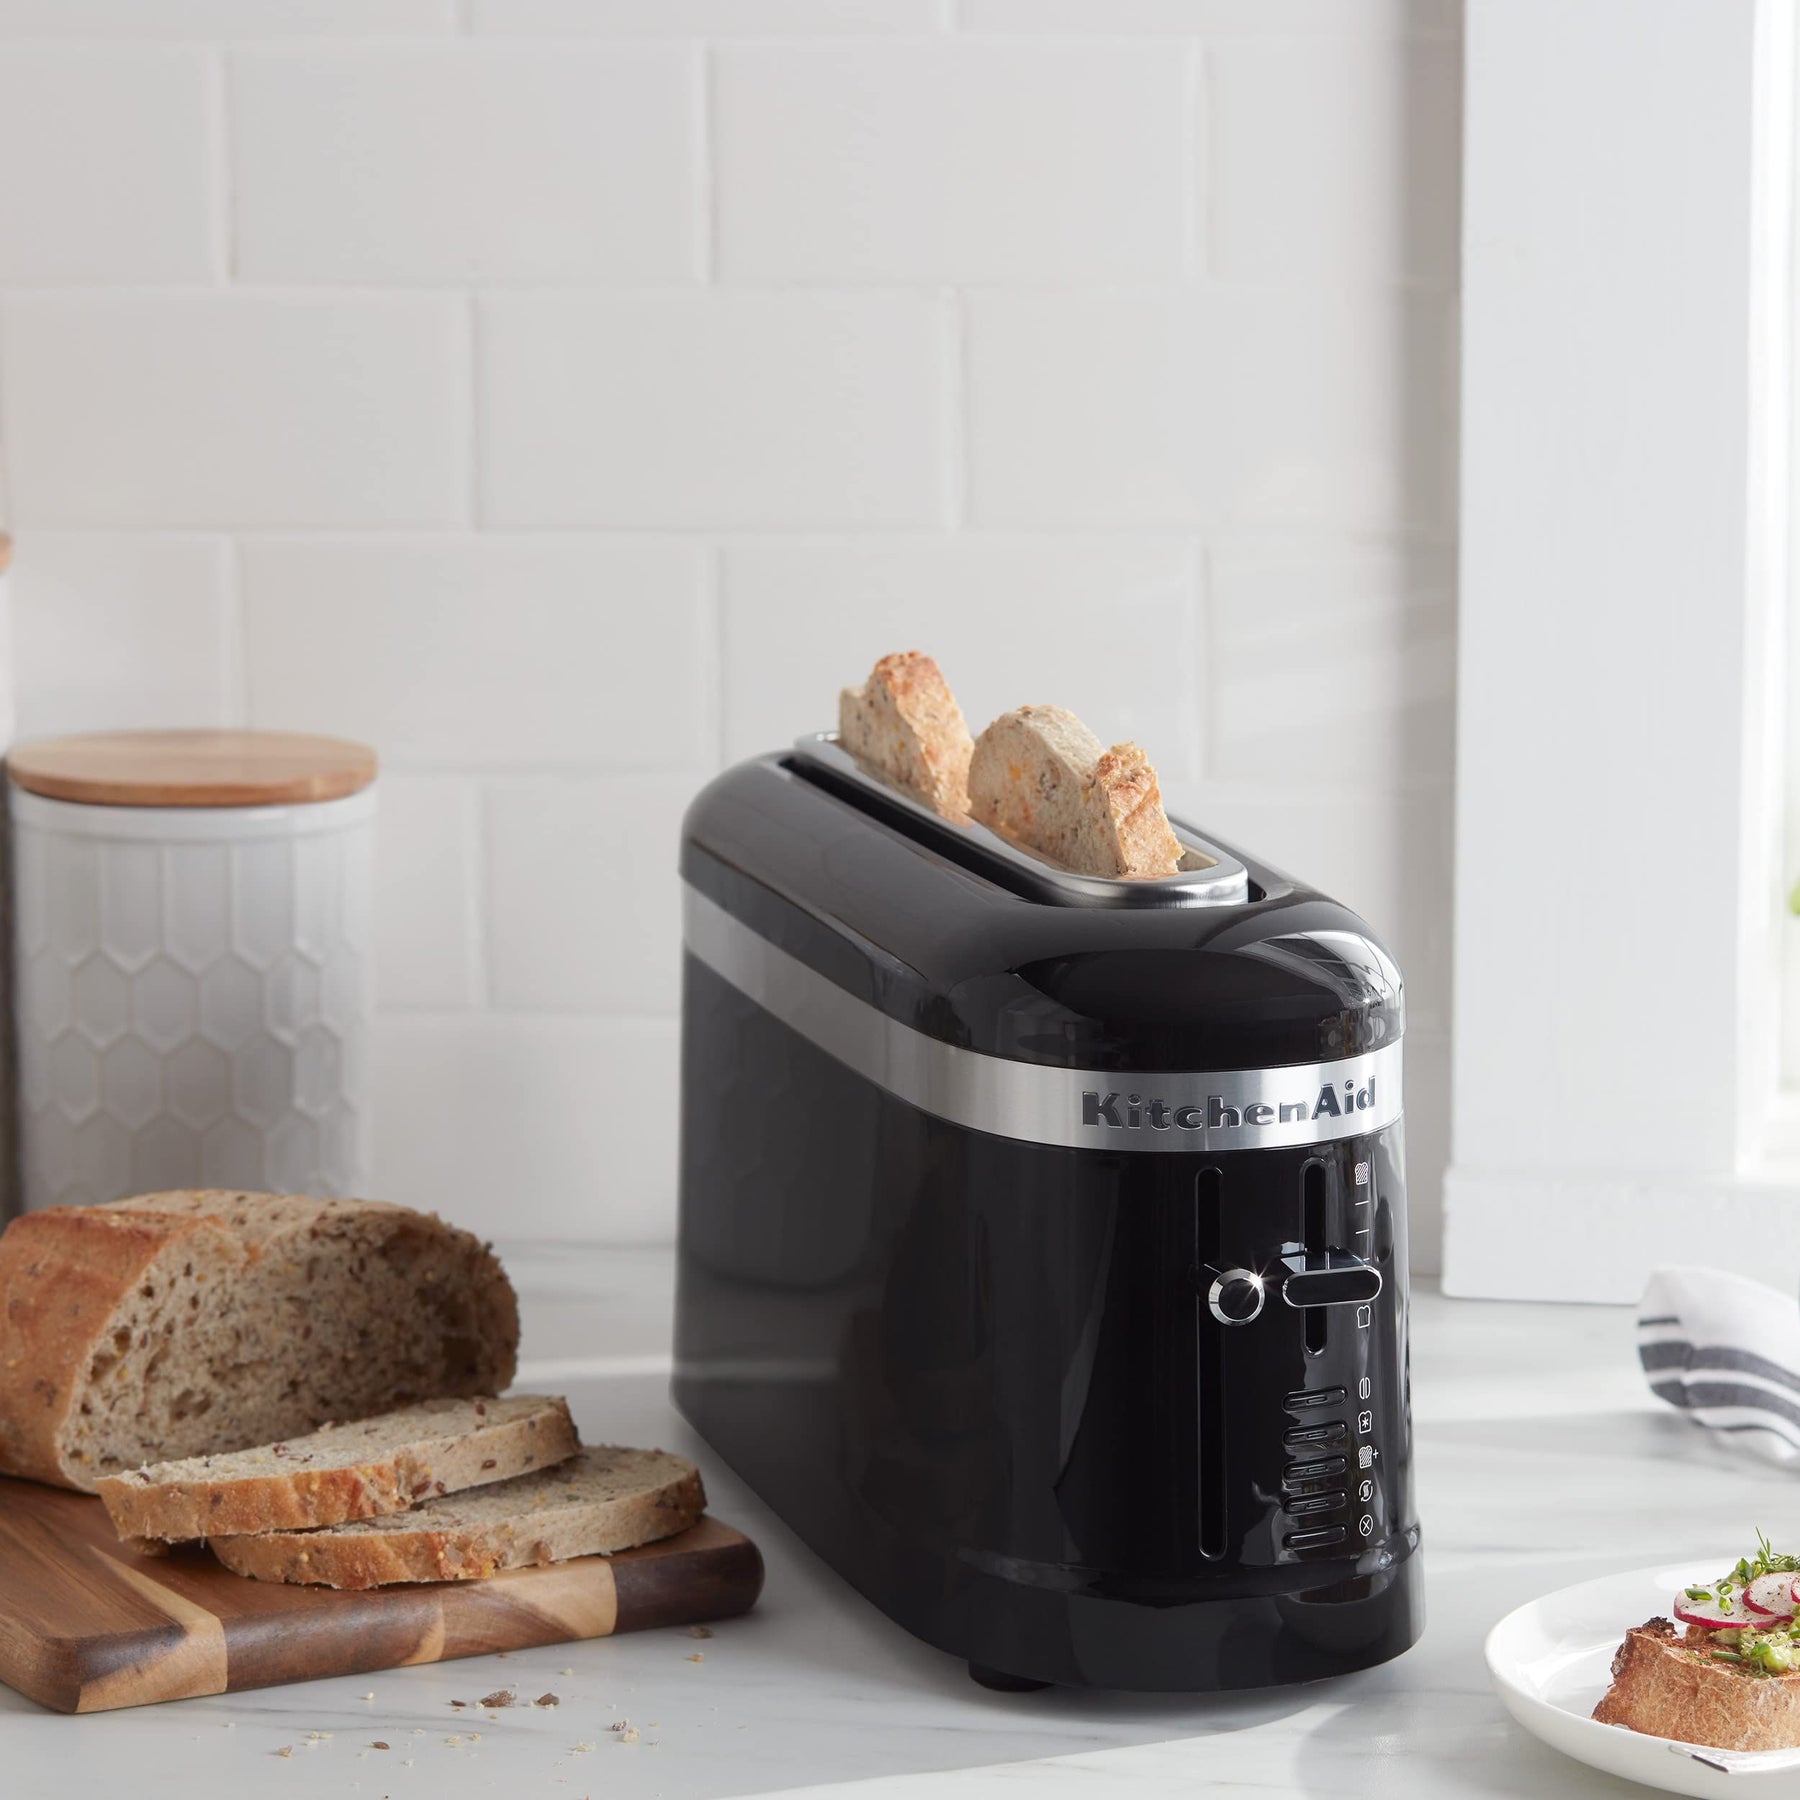 How Dualit set the standards for perfectly toasted bread, The Independent